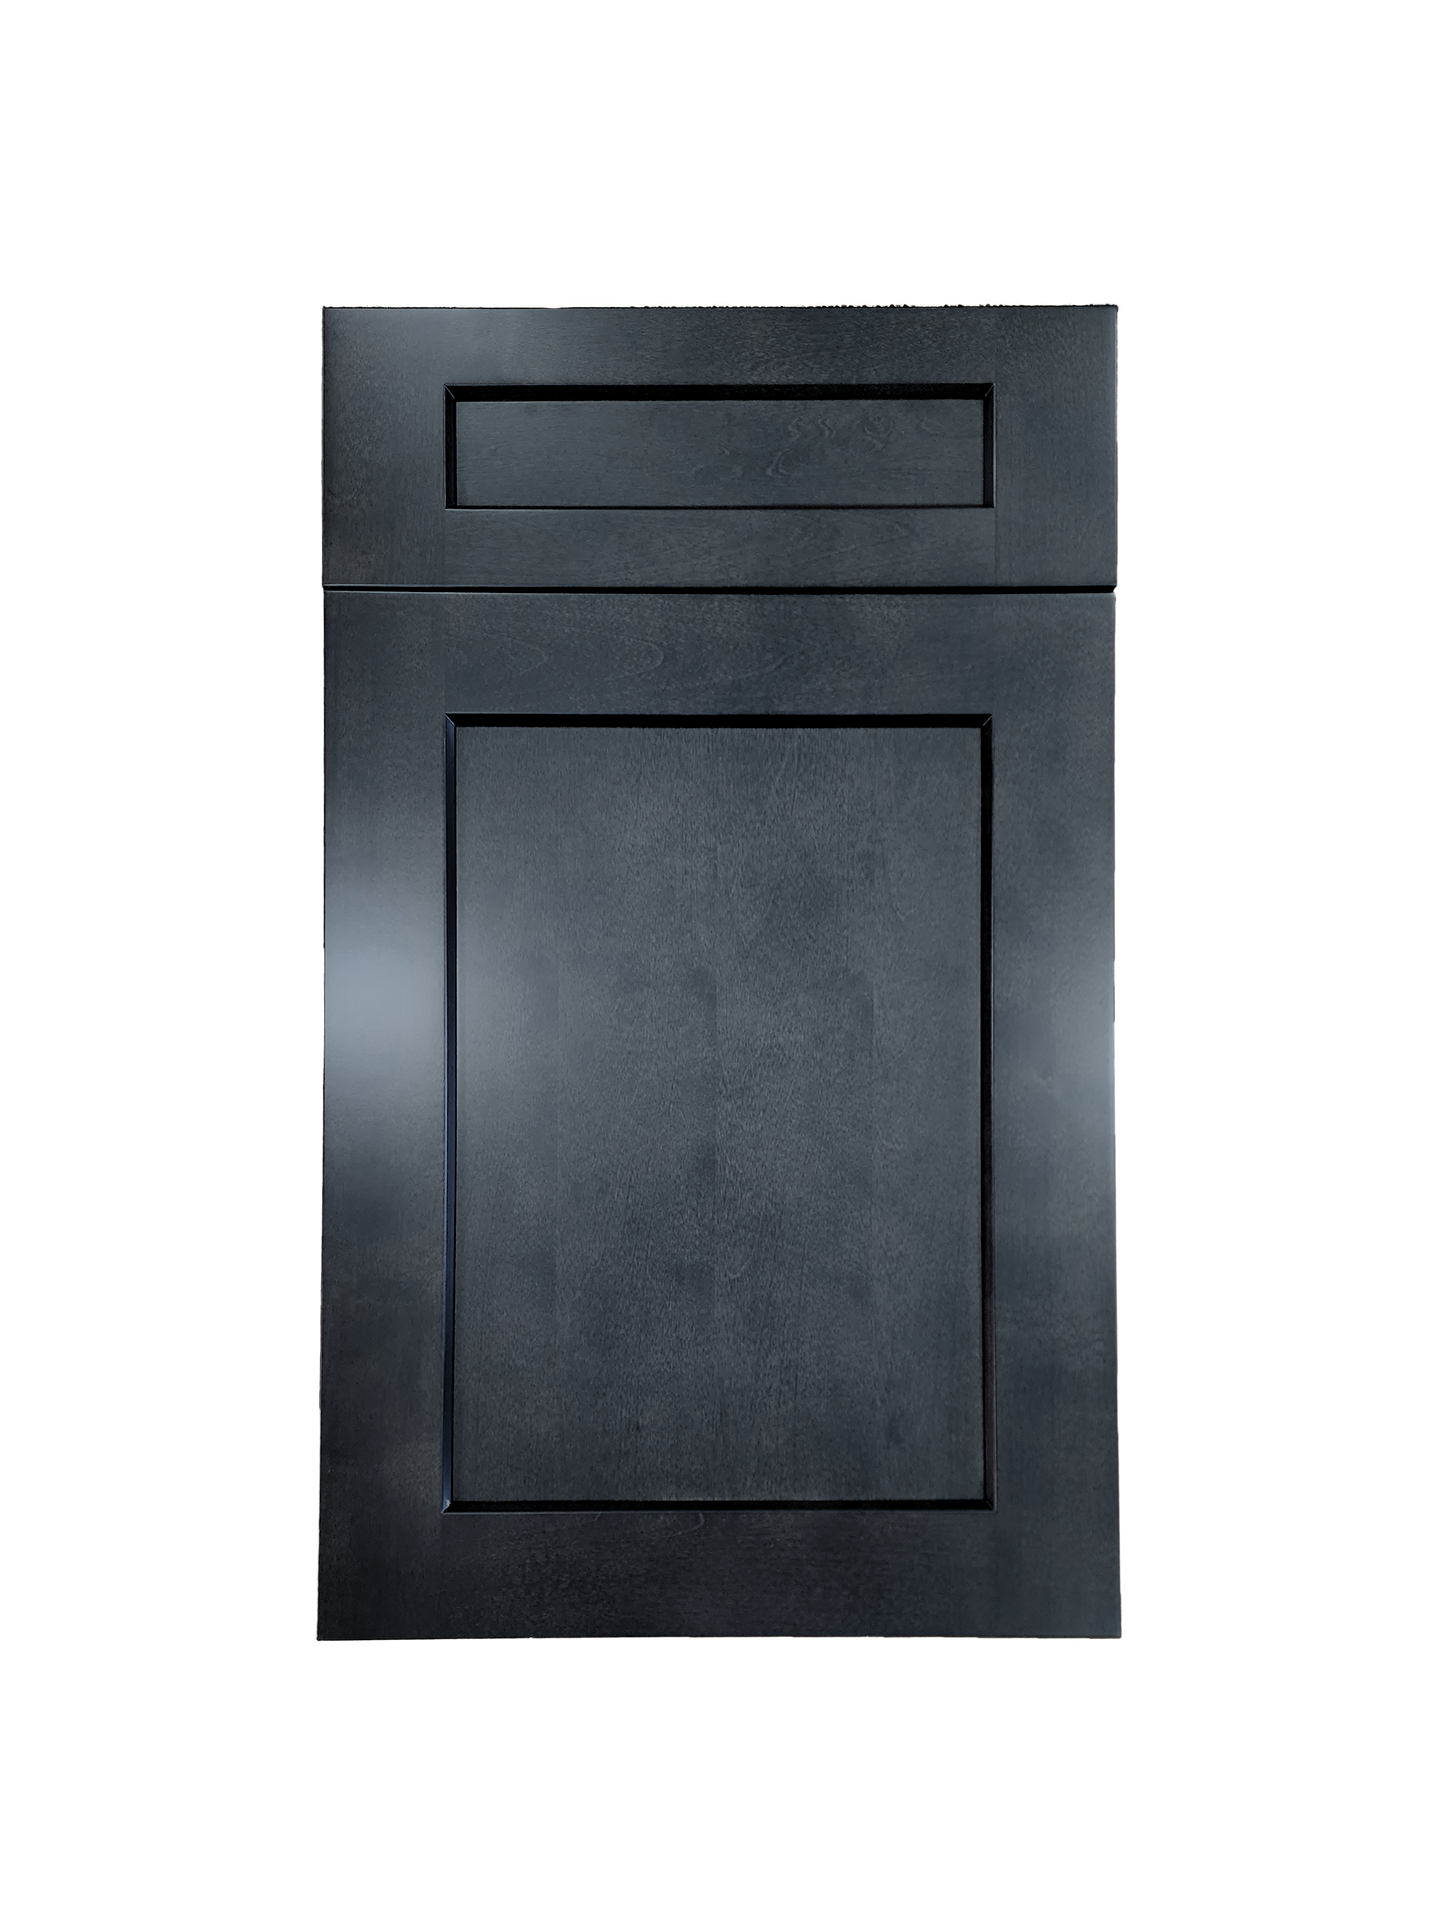 Stormy Grey Base Cabinet 15 inches wide 24 inches deep 34.5 inches tall with Stormy Grey box and Stormy Grey doors